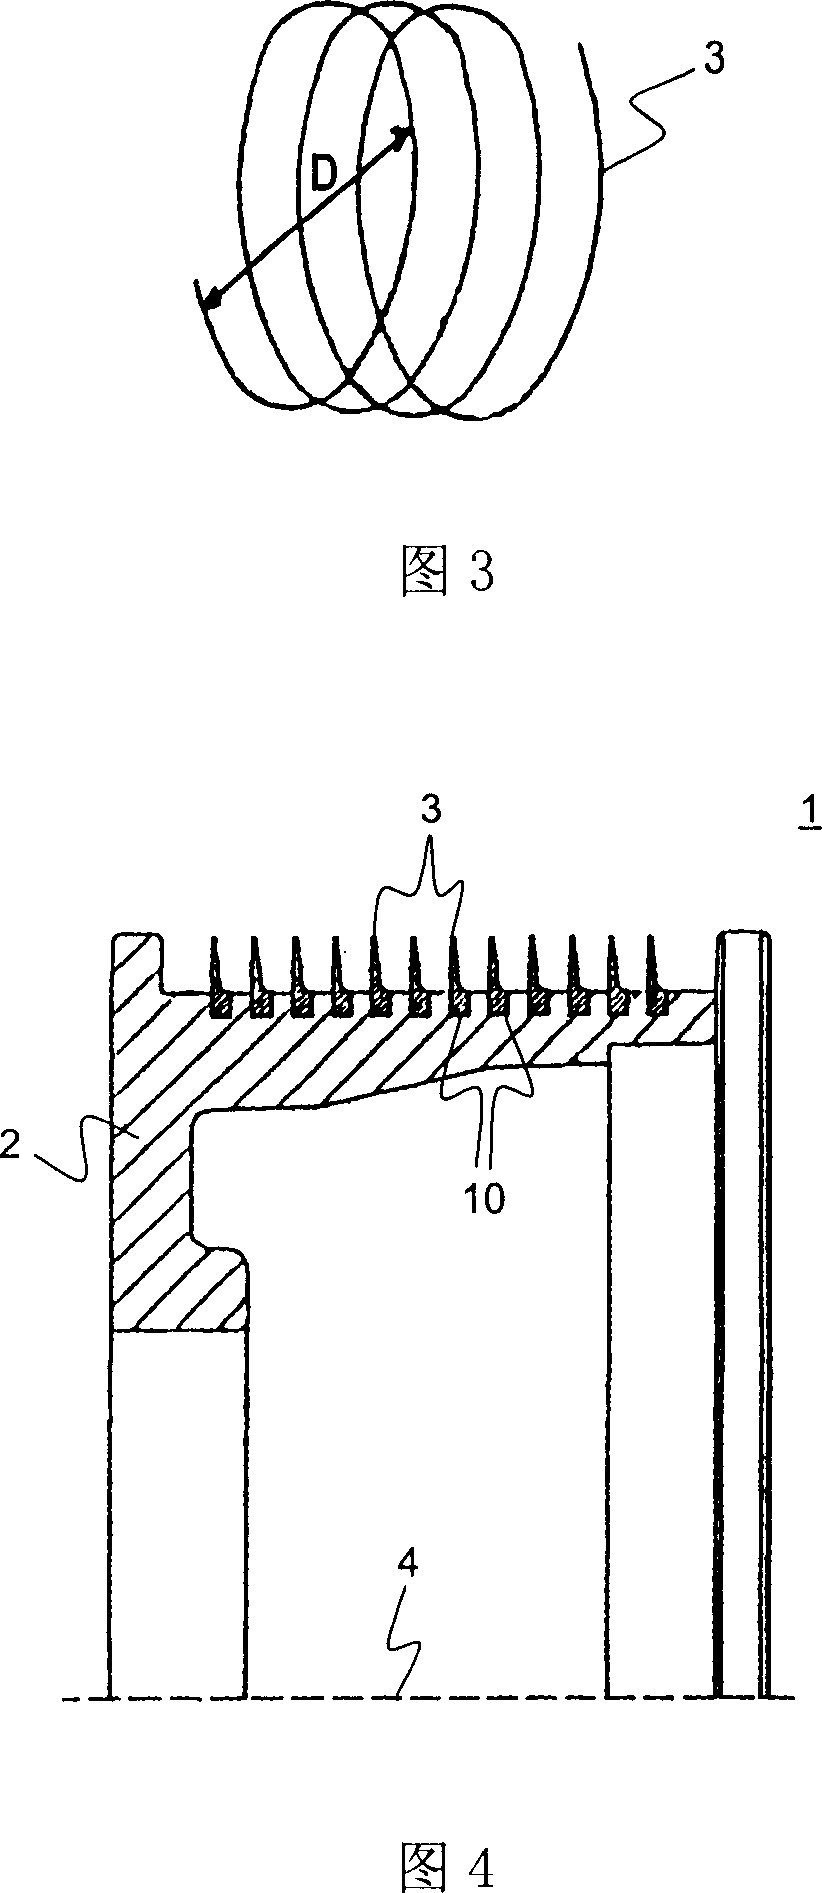 Opening device for spinning machines